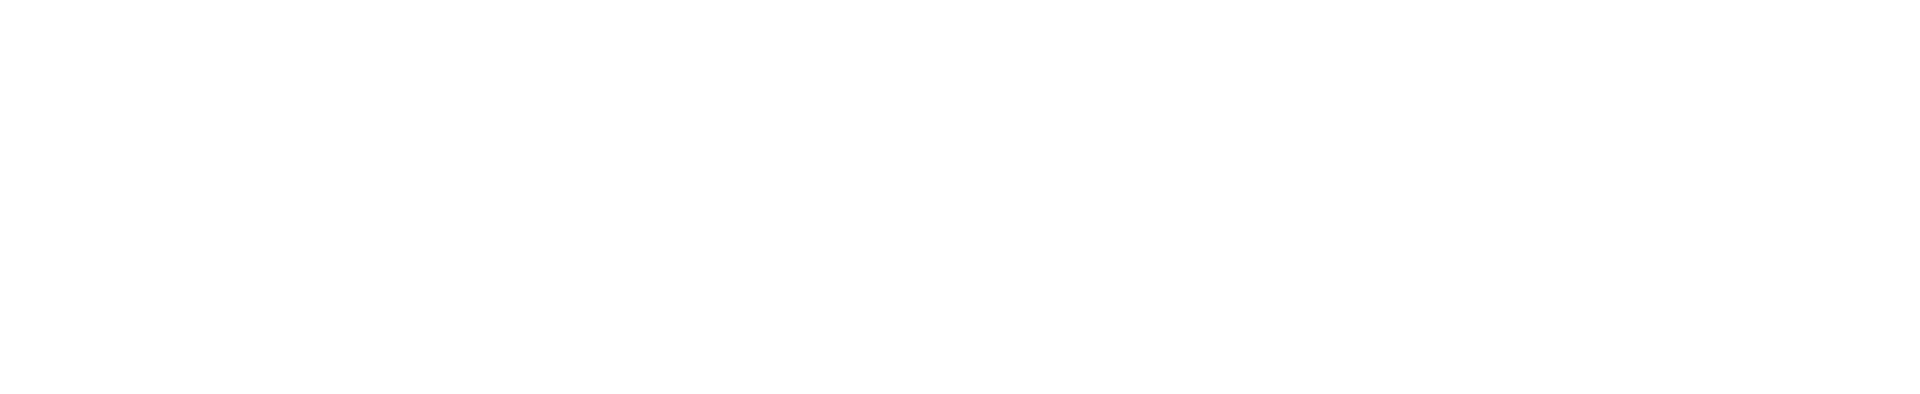 A green and white background with a line